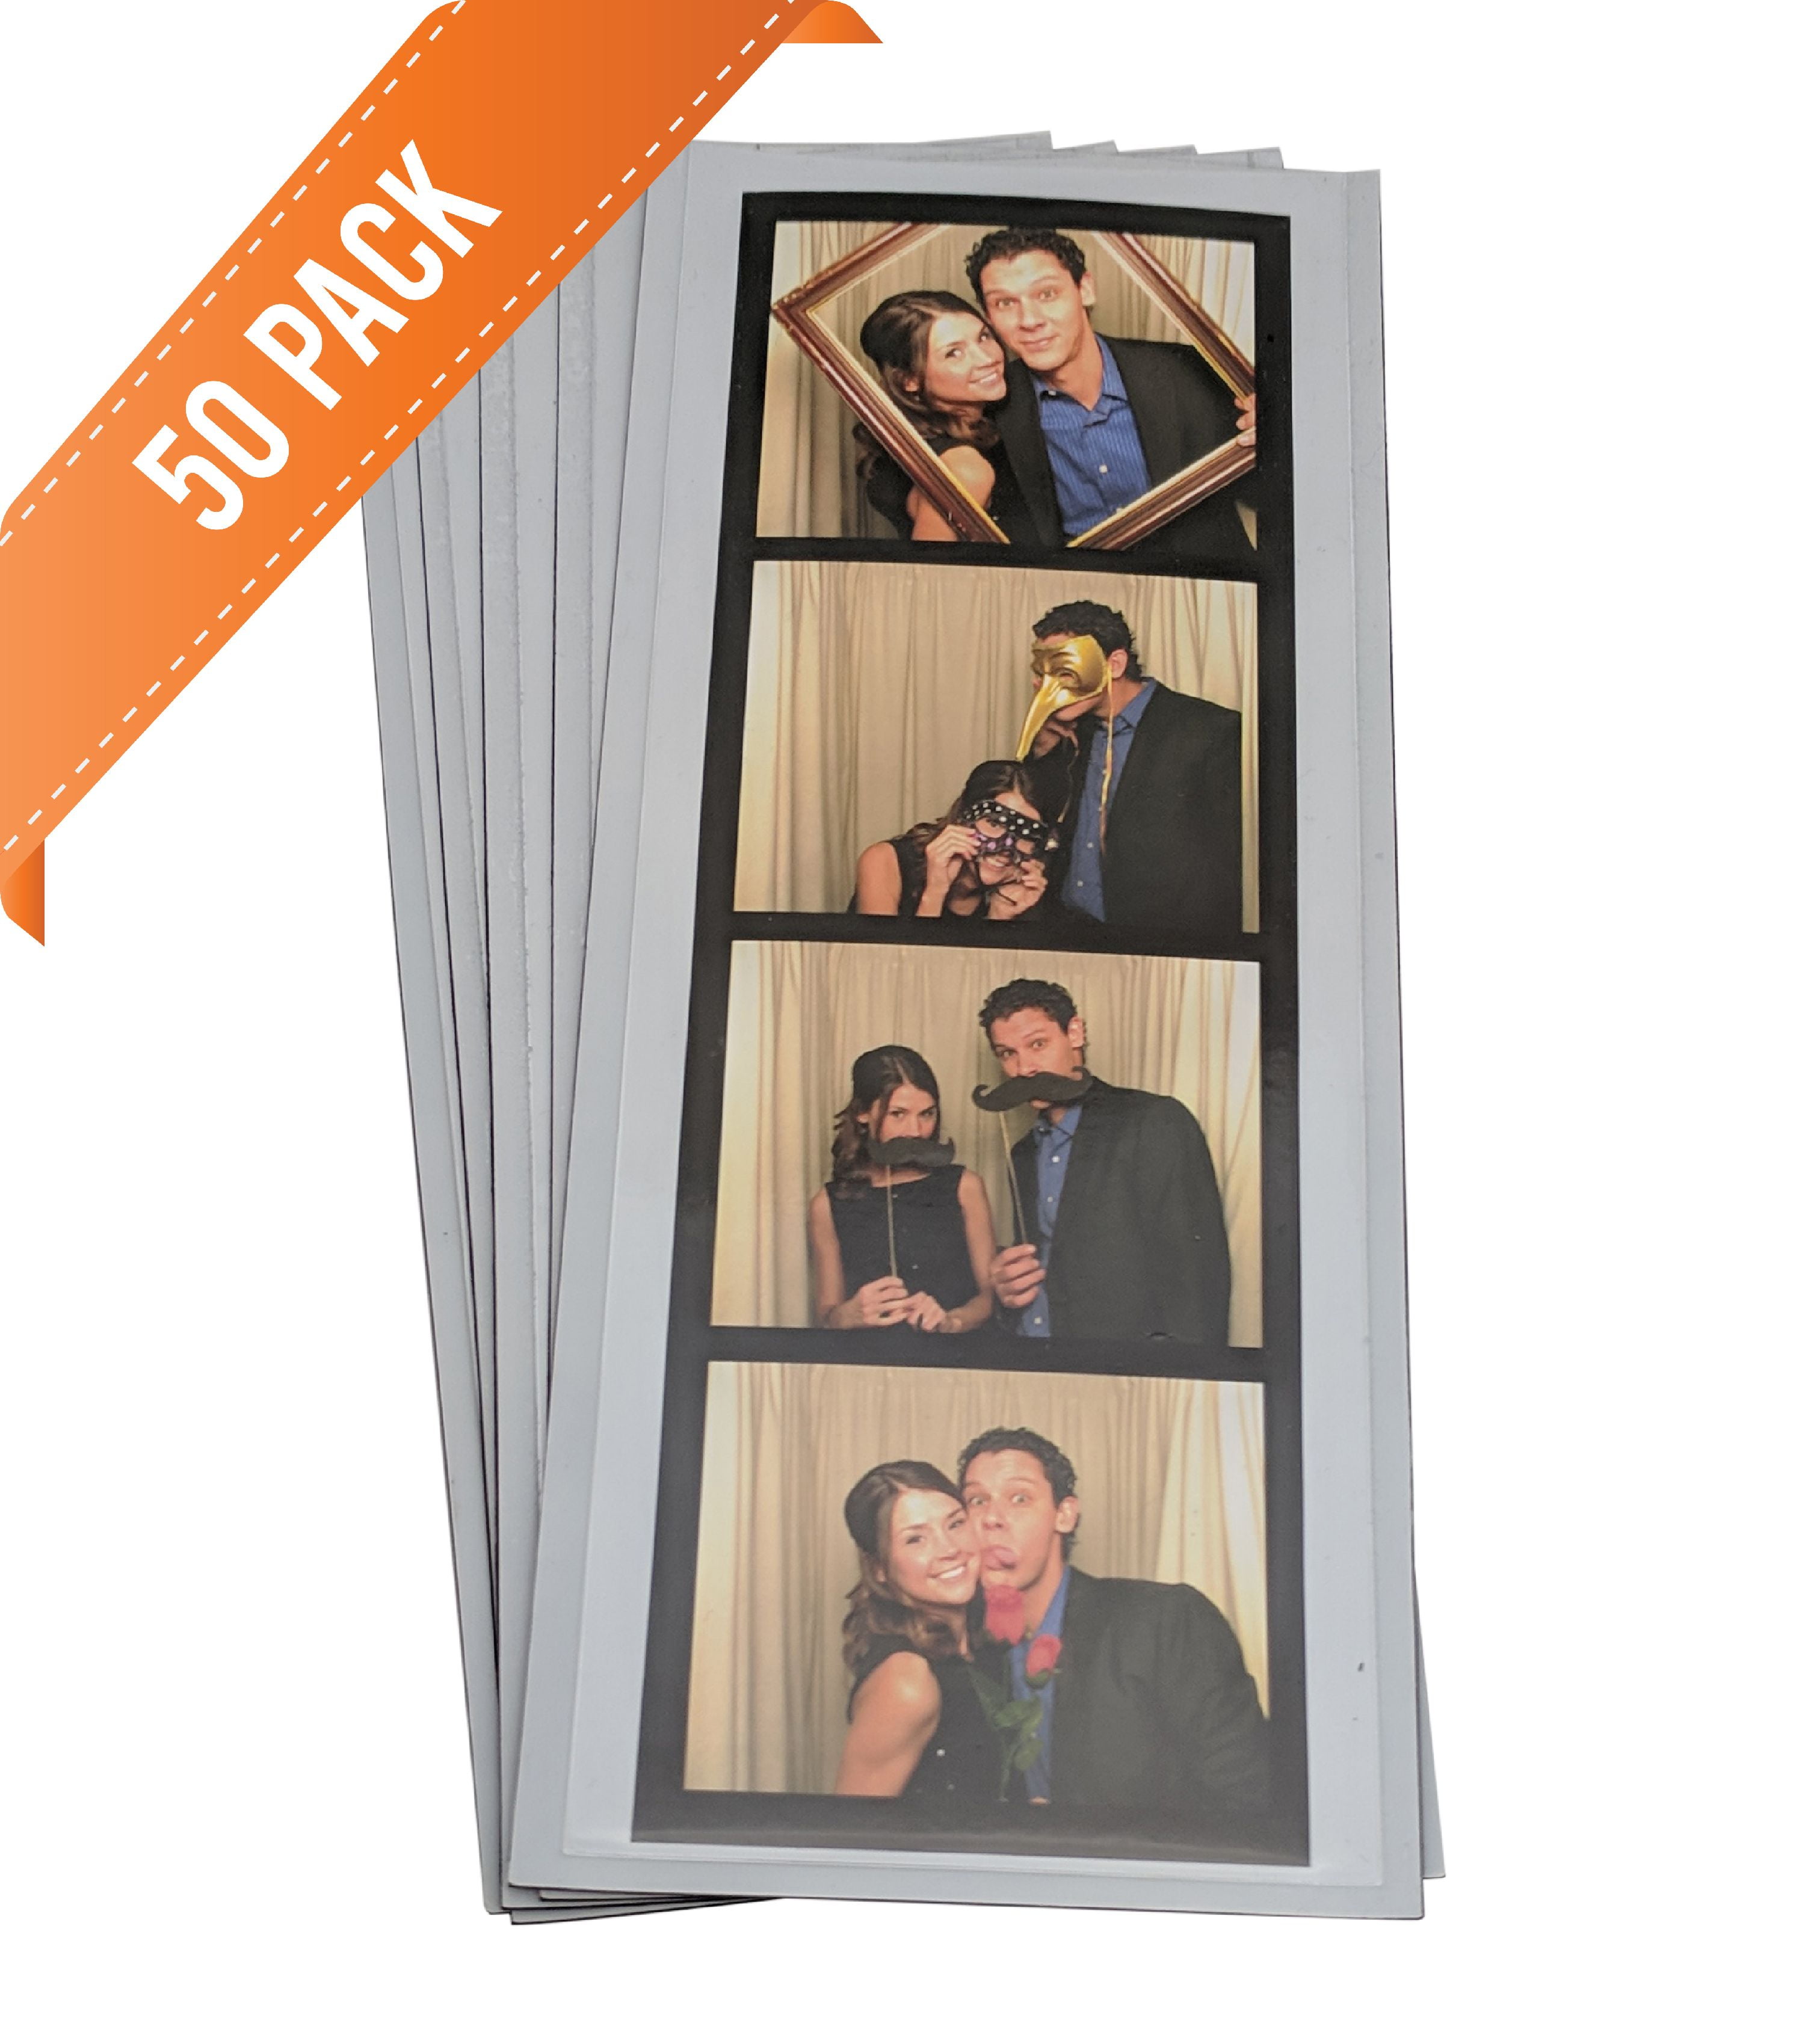 Glass with stand & hook 2"x6" PhotoBooth Photo Booth Strips Premium Gold Frame 